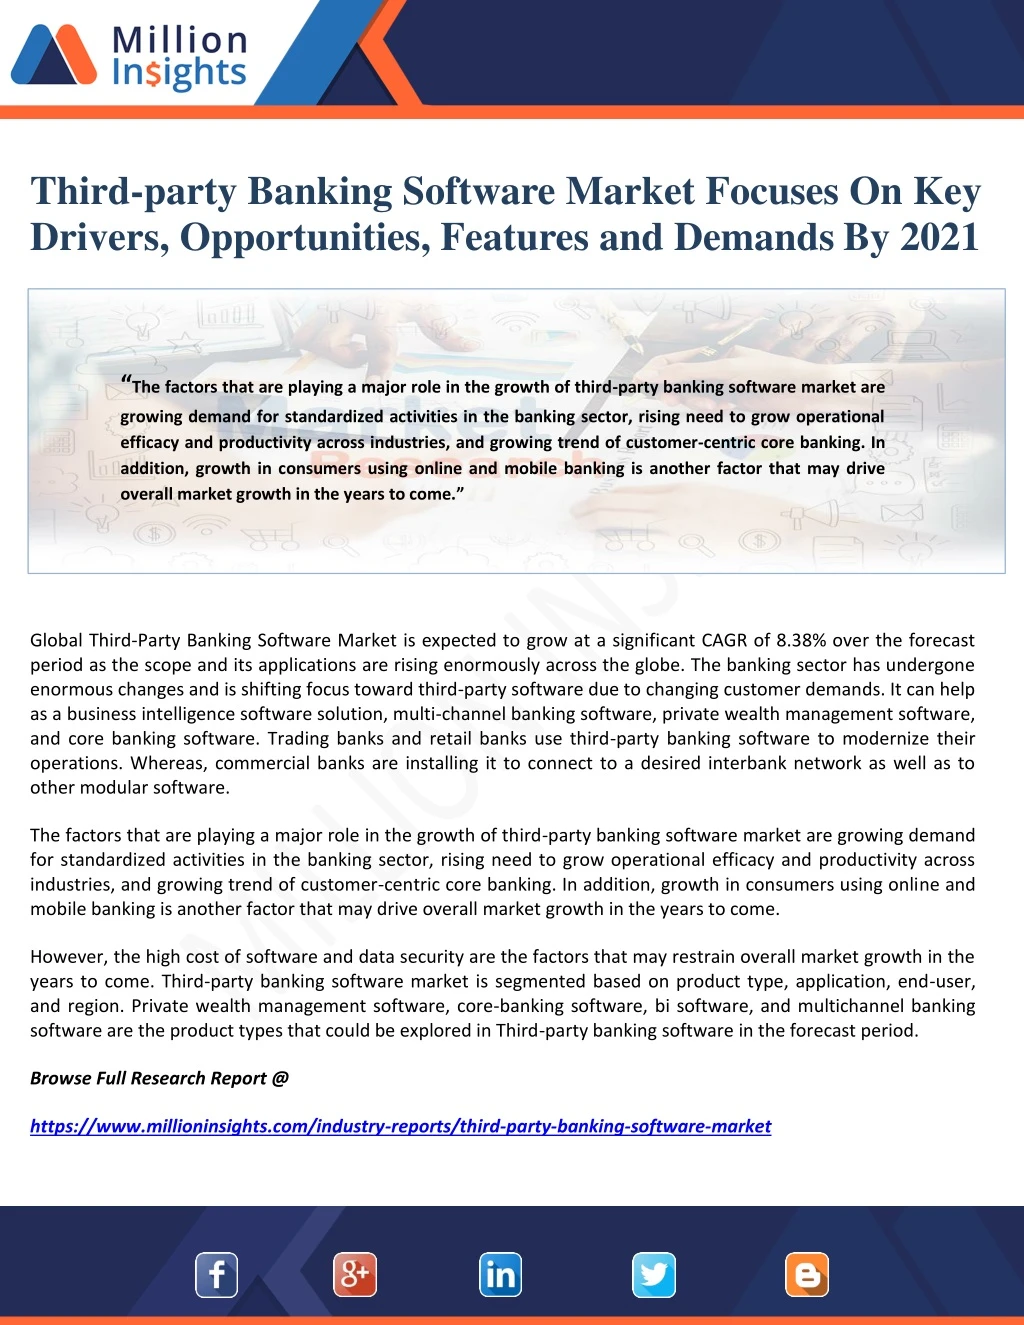 third party banking software market focuses